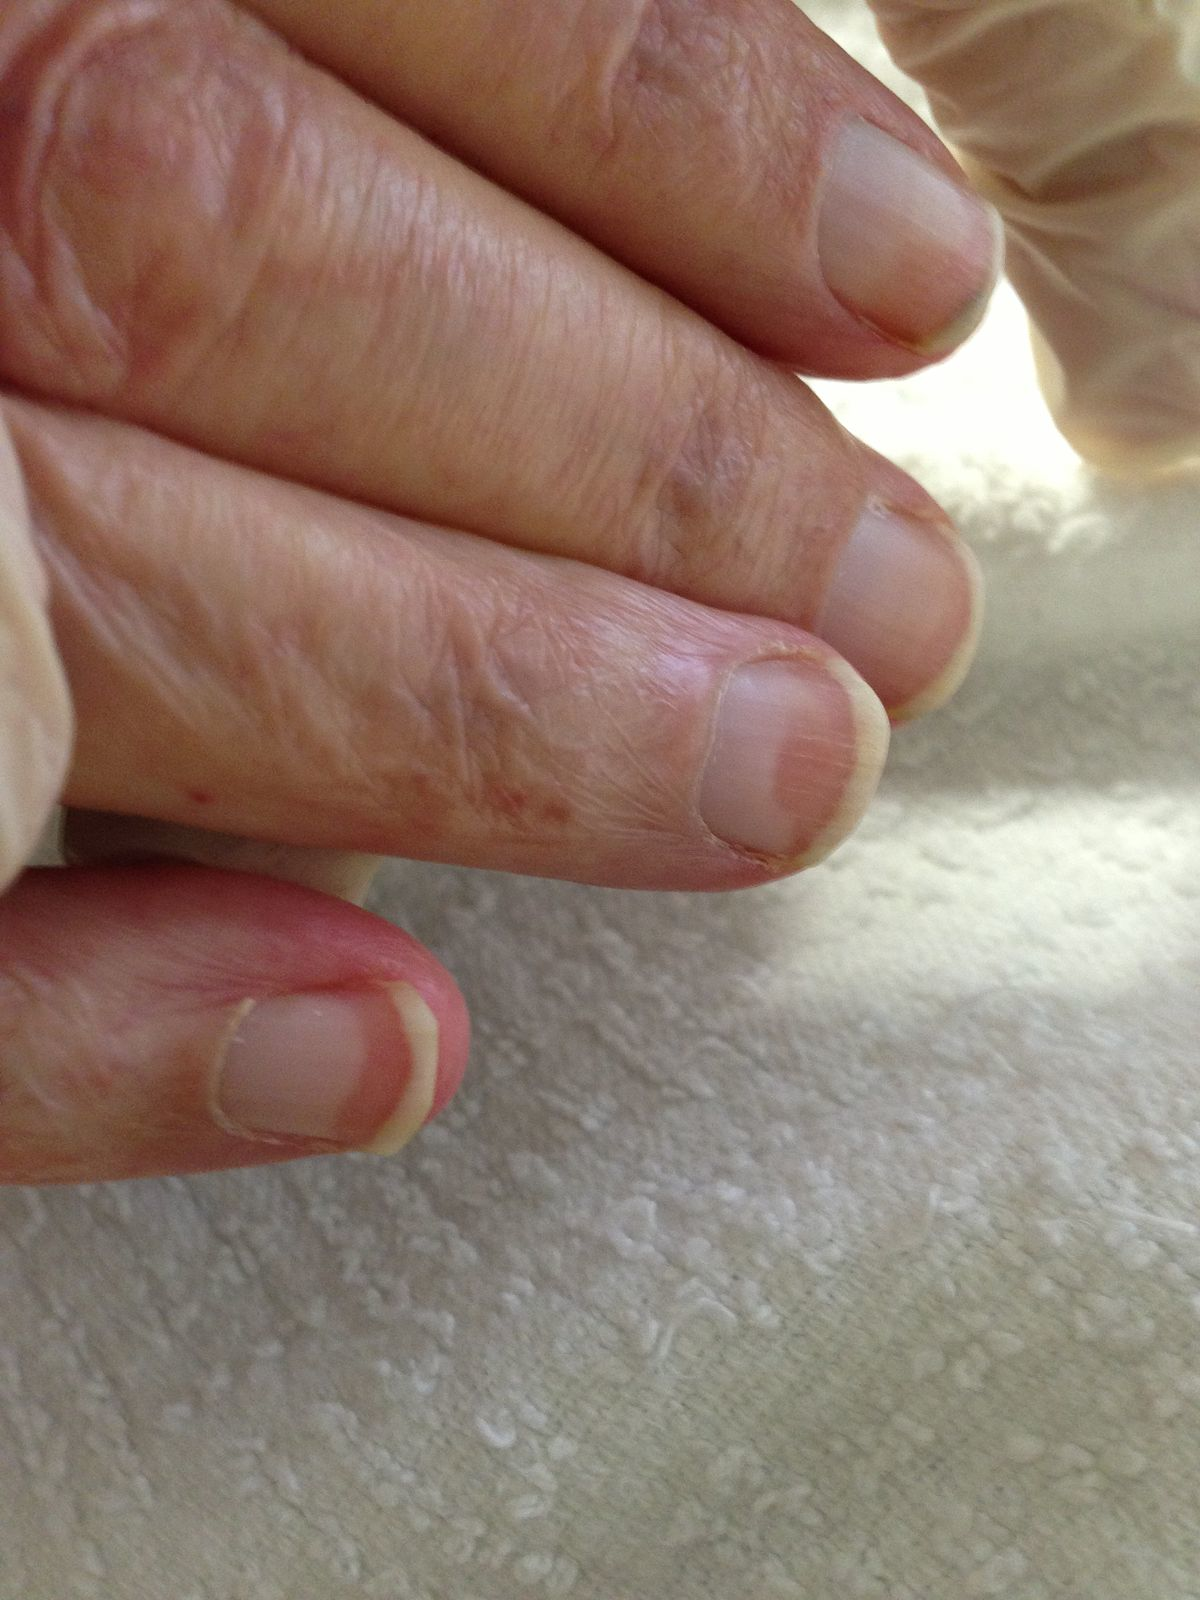 Nails Changes and Disorders in Elderly Libyans